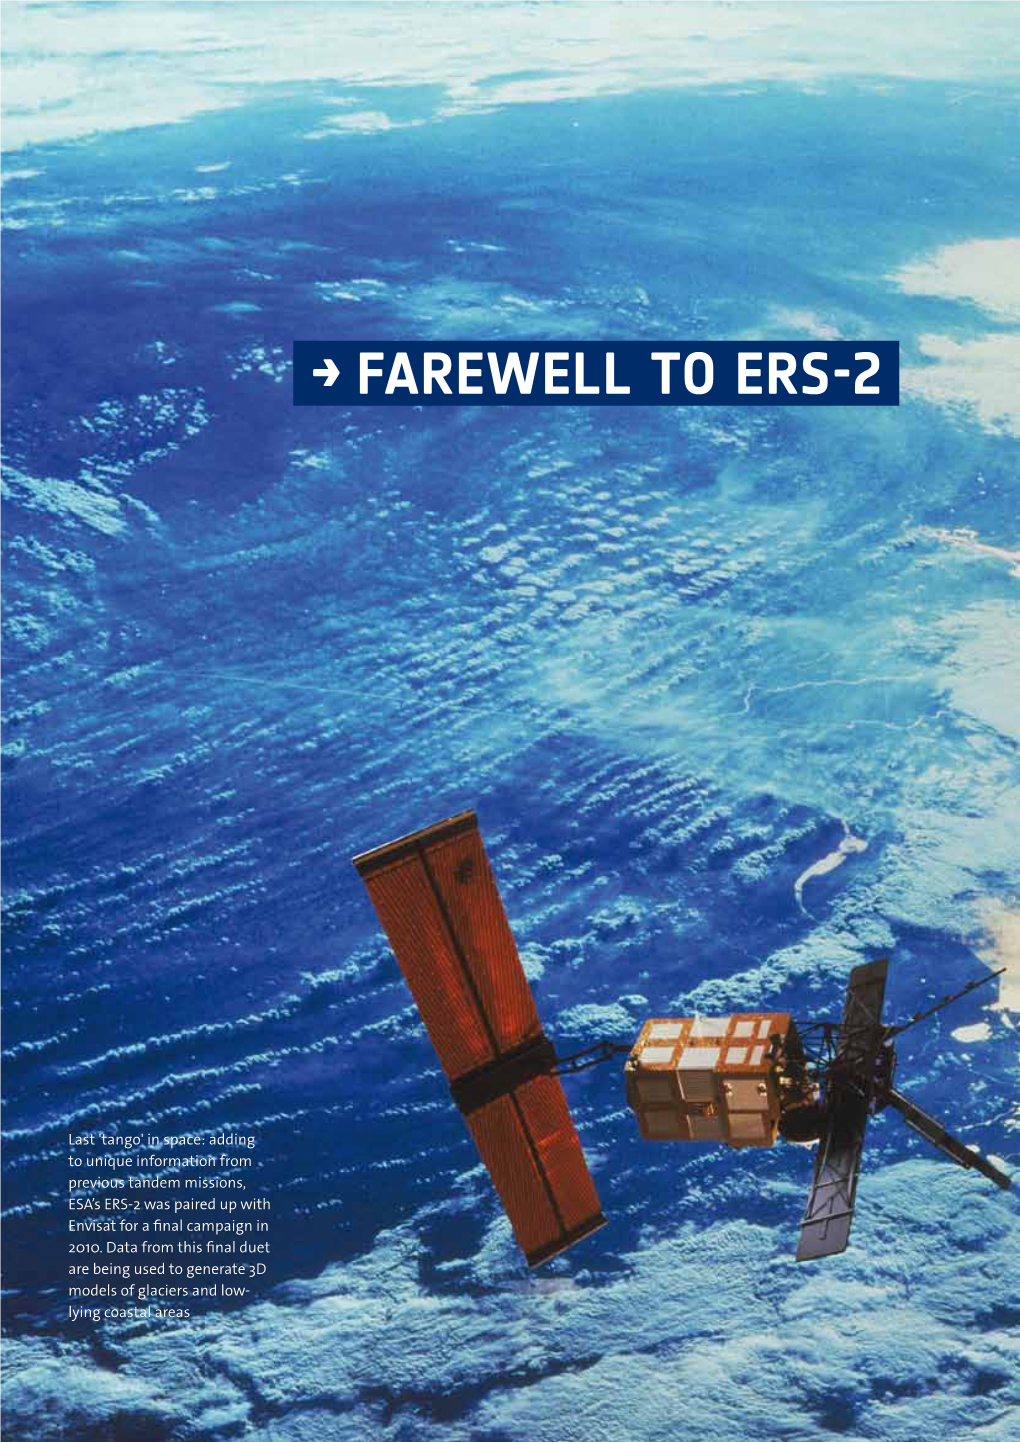 → Farewell to Ers-2